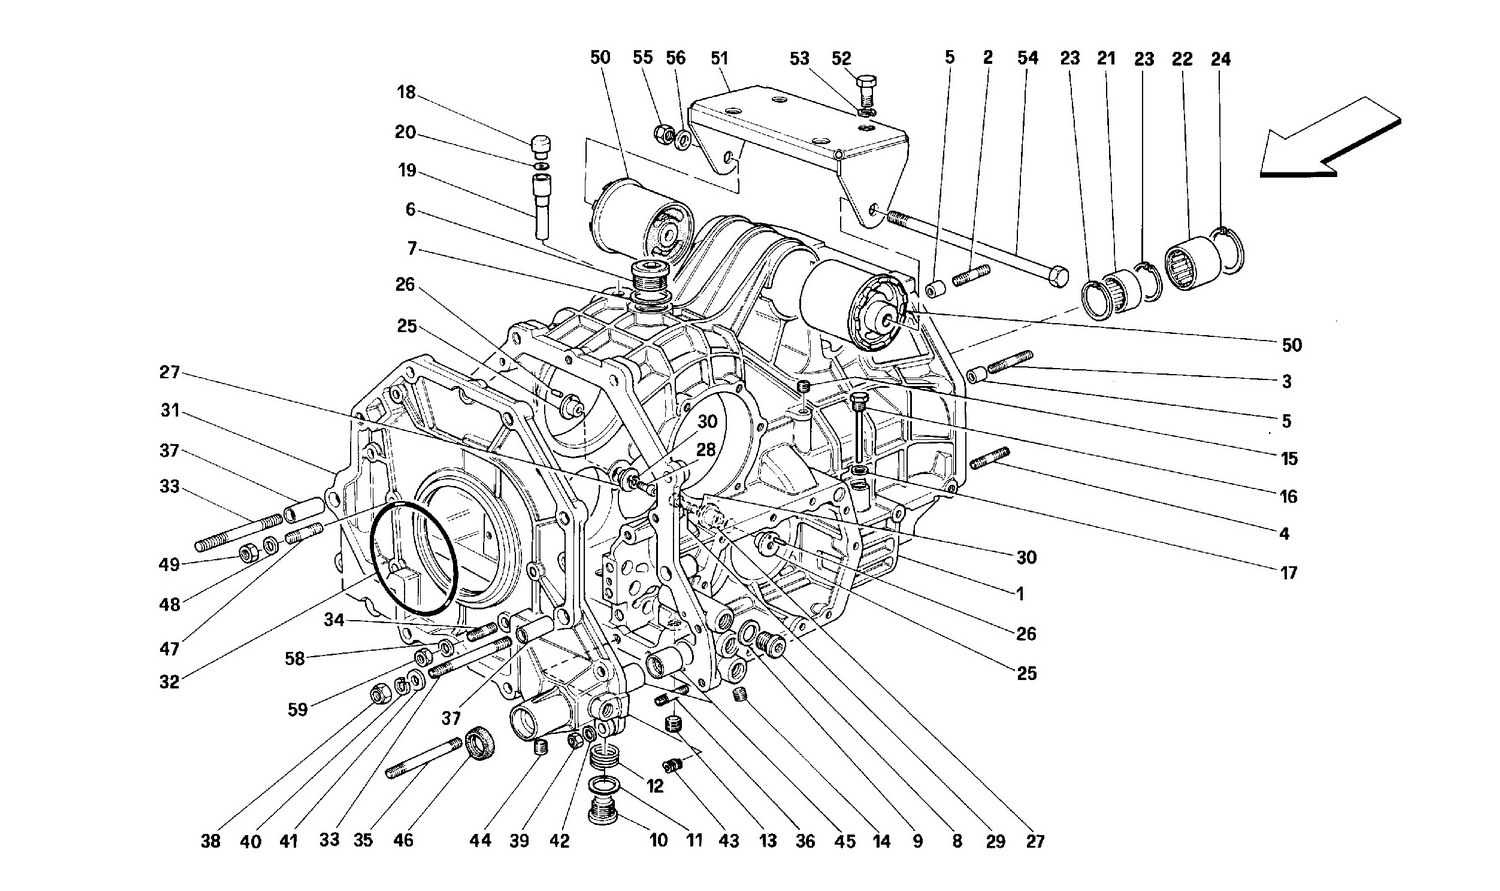 Schematic: Gearbox Differential Housing And Intermediate Casing